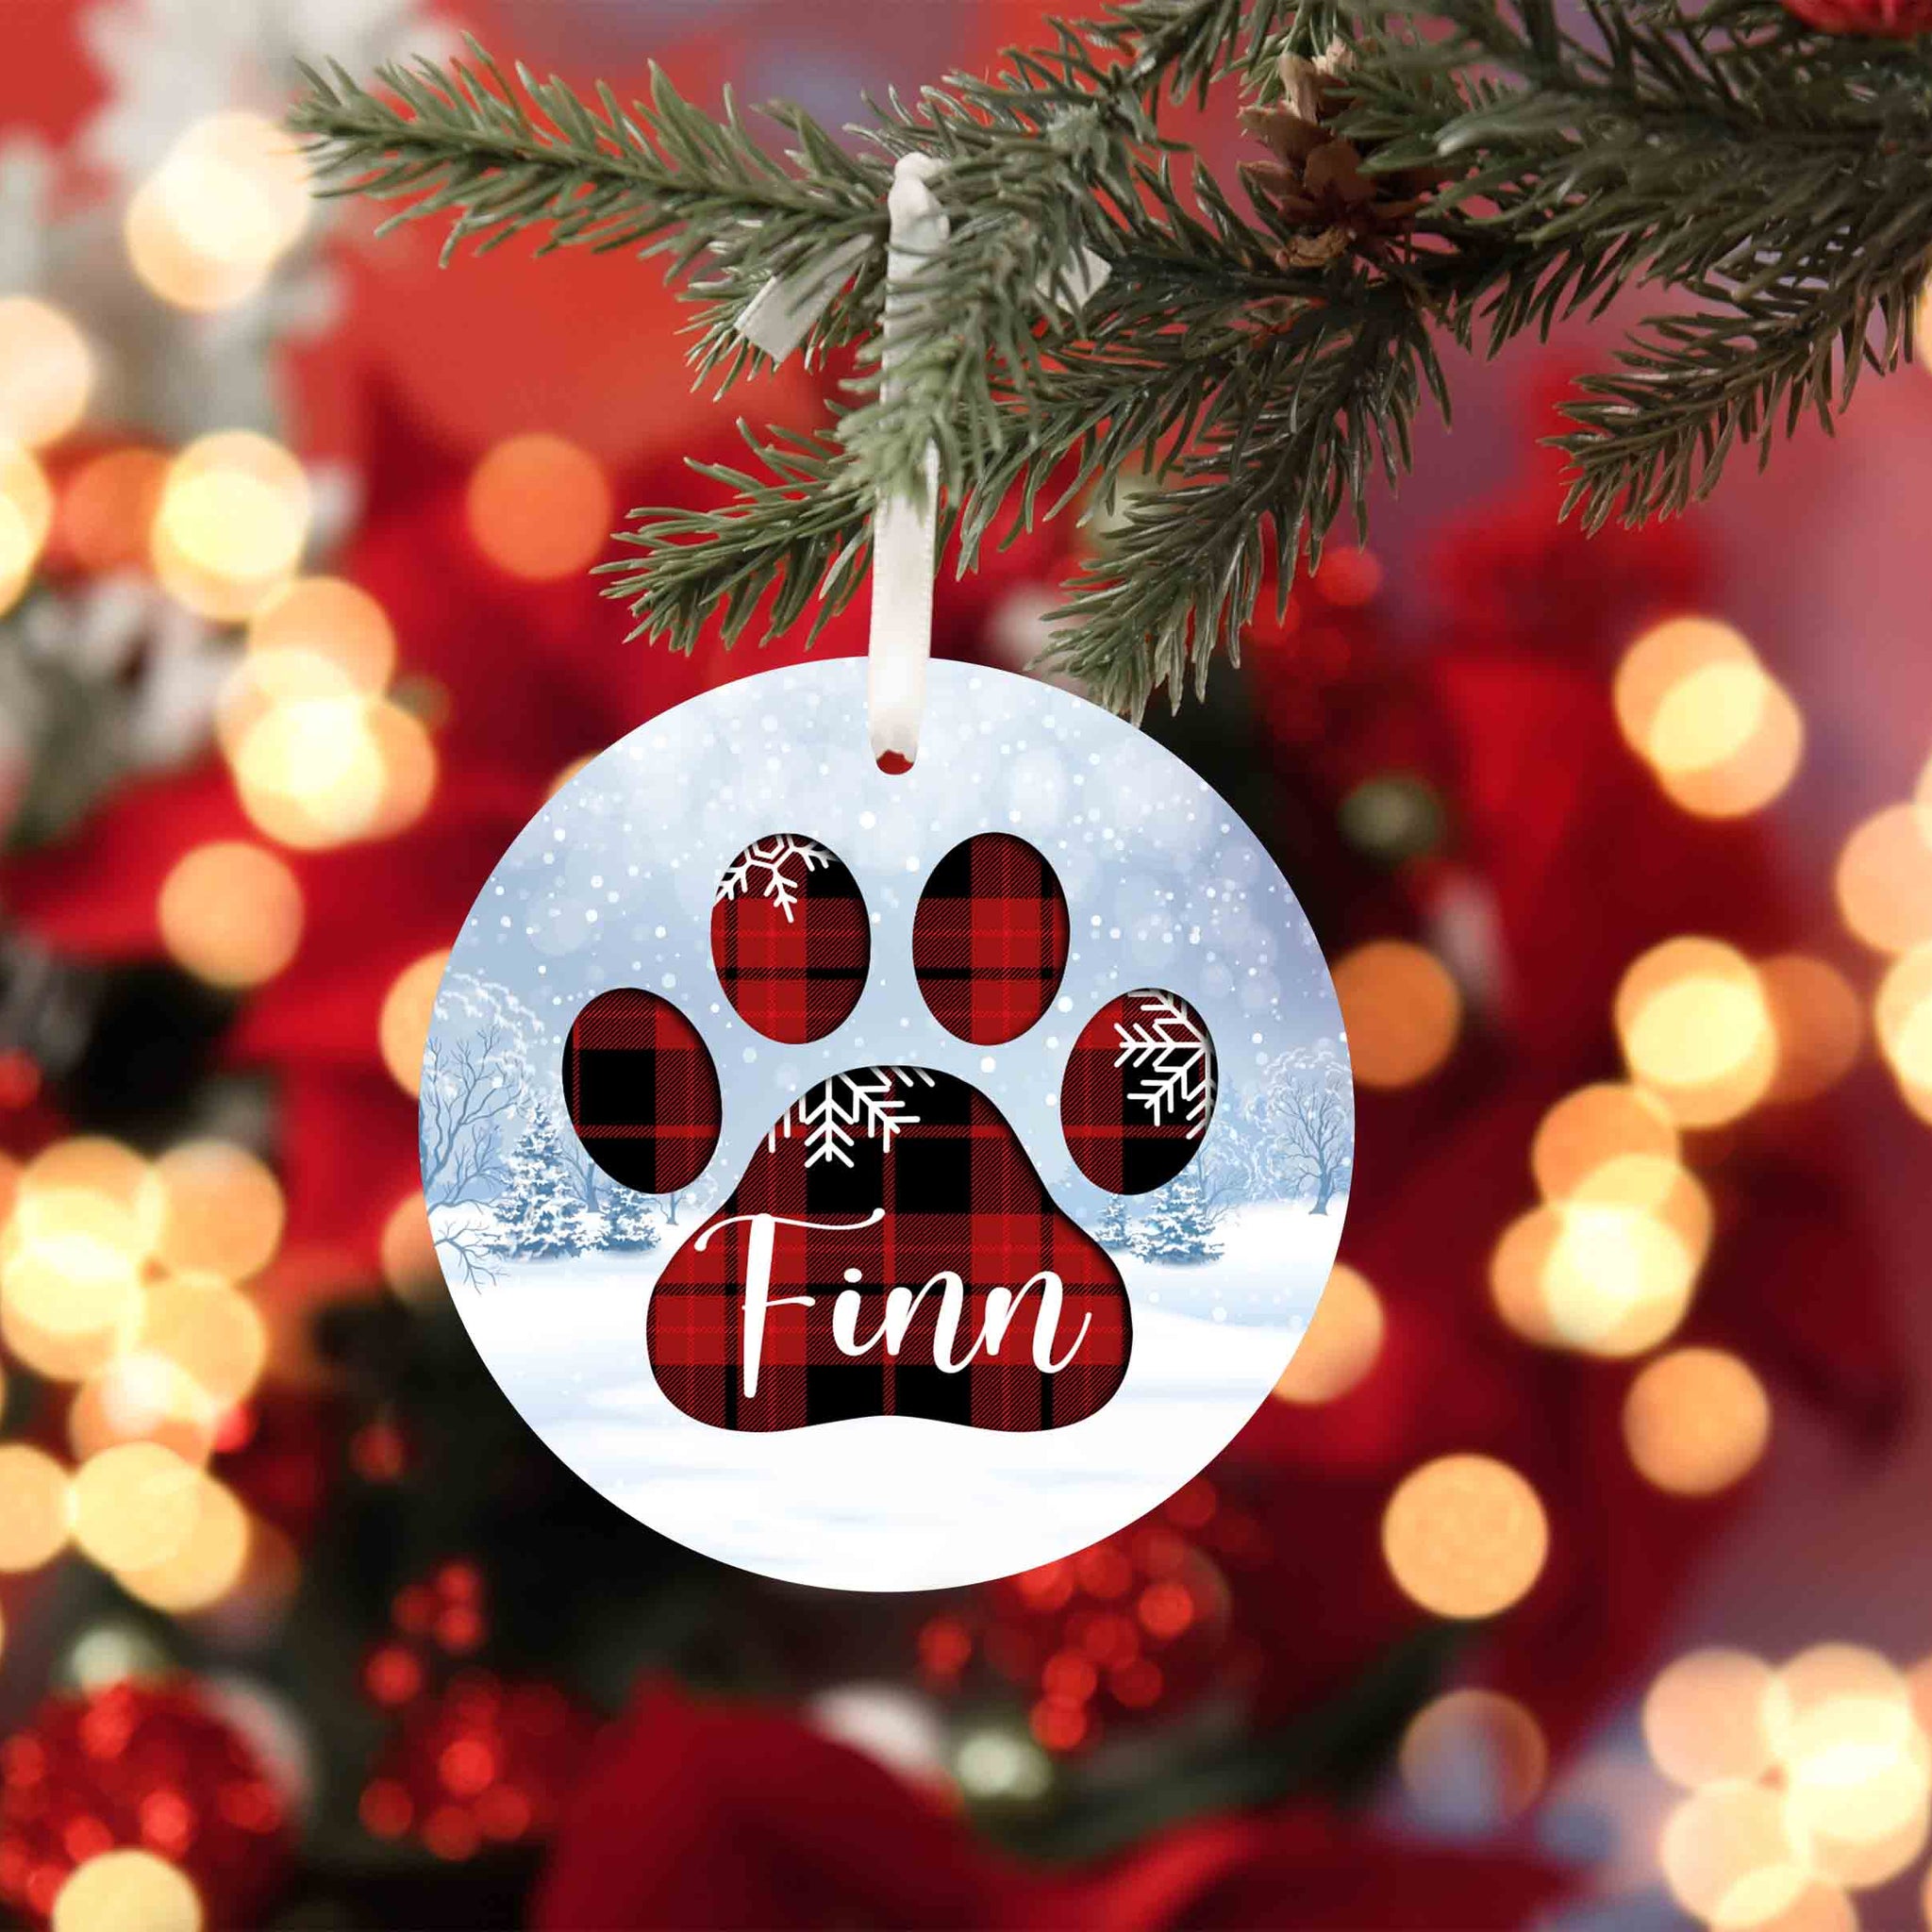 Paw Print Ornament, Winter Ornament, Snowflakes Ornament, Christmas Ornaments, Custom Name Ornaments, Ornament Gifts